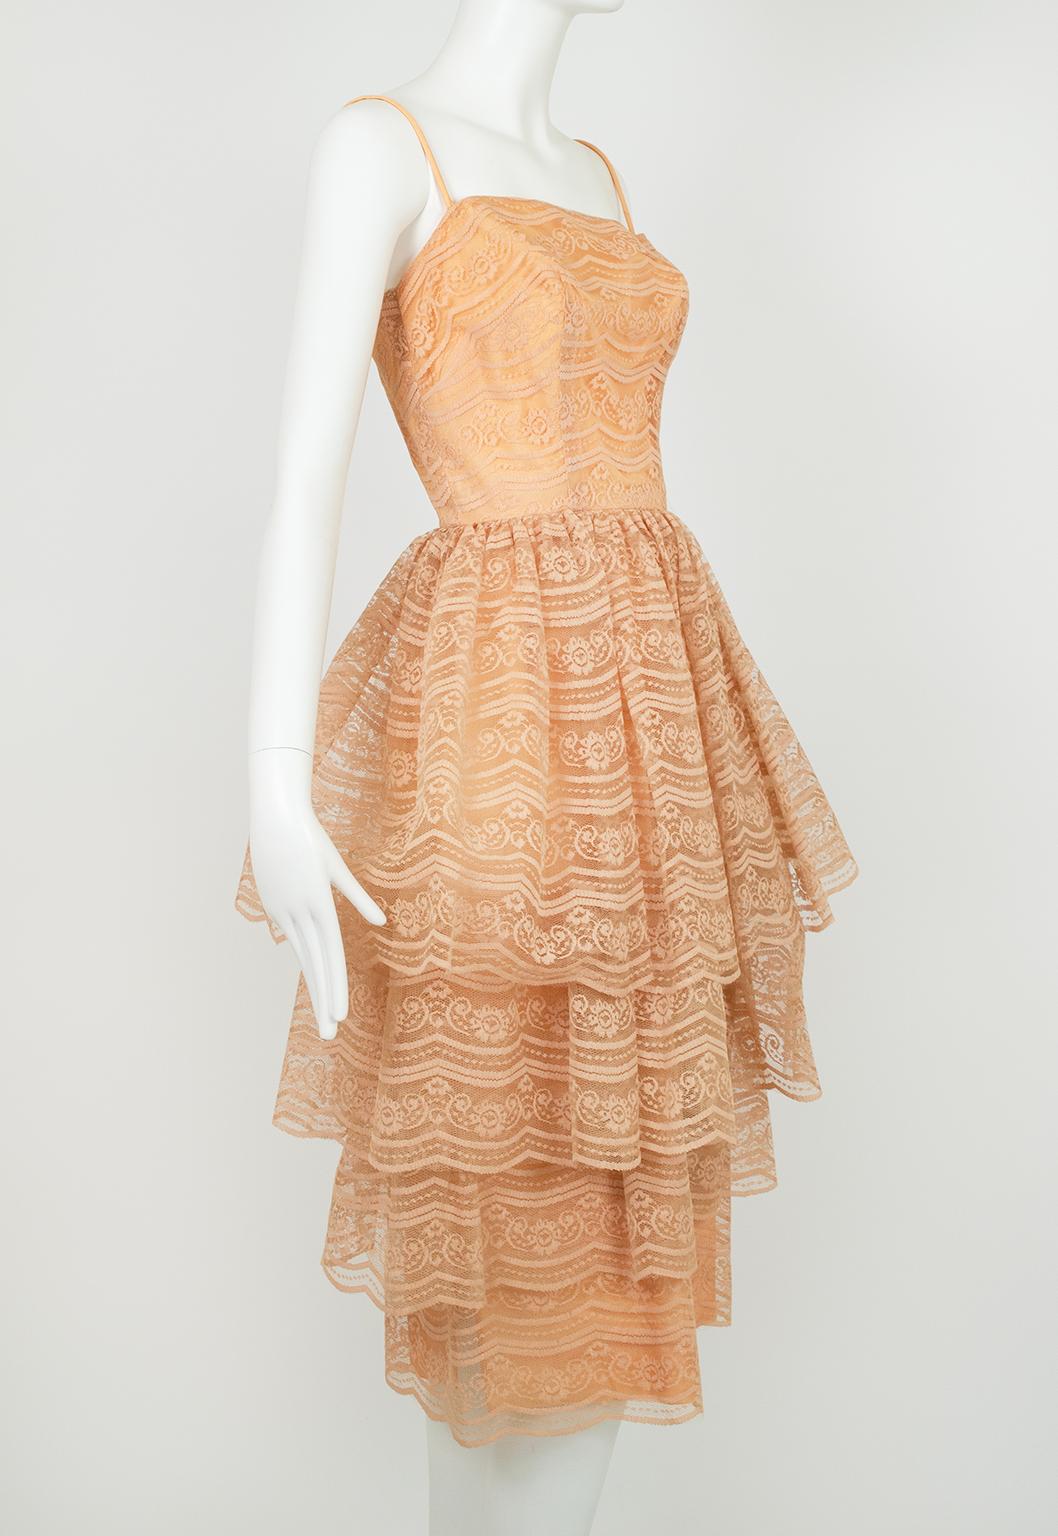 Nude Lace Lampshade Funnel Skirt Cocktail Party Dress – XS, 1960s In Excellent Condition For Sale In Tucson, AZ